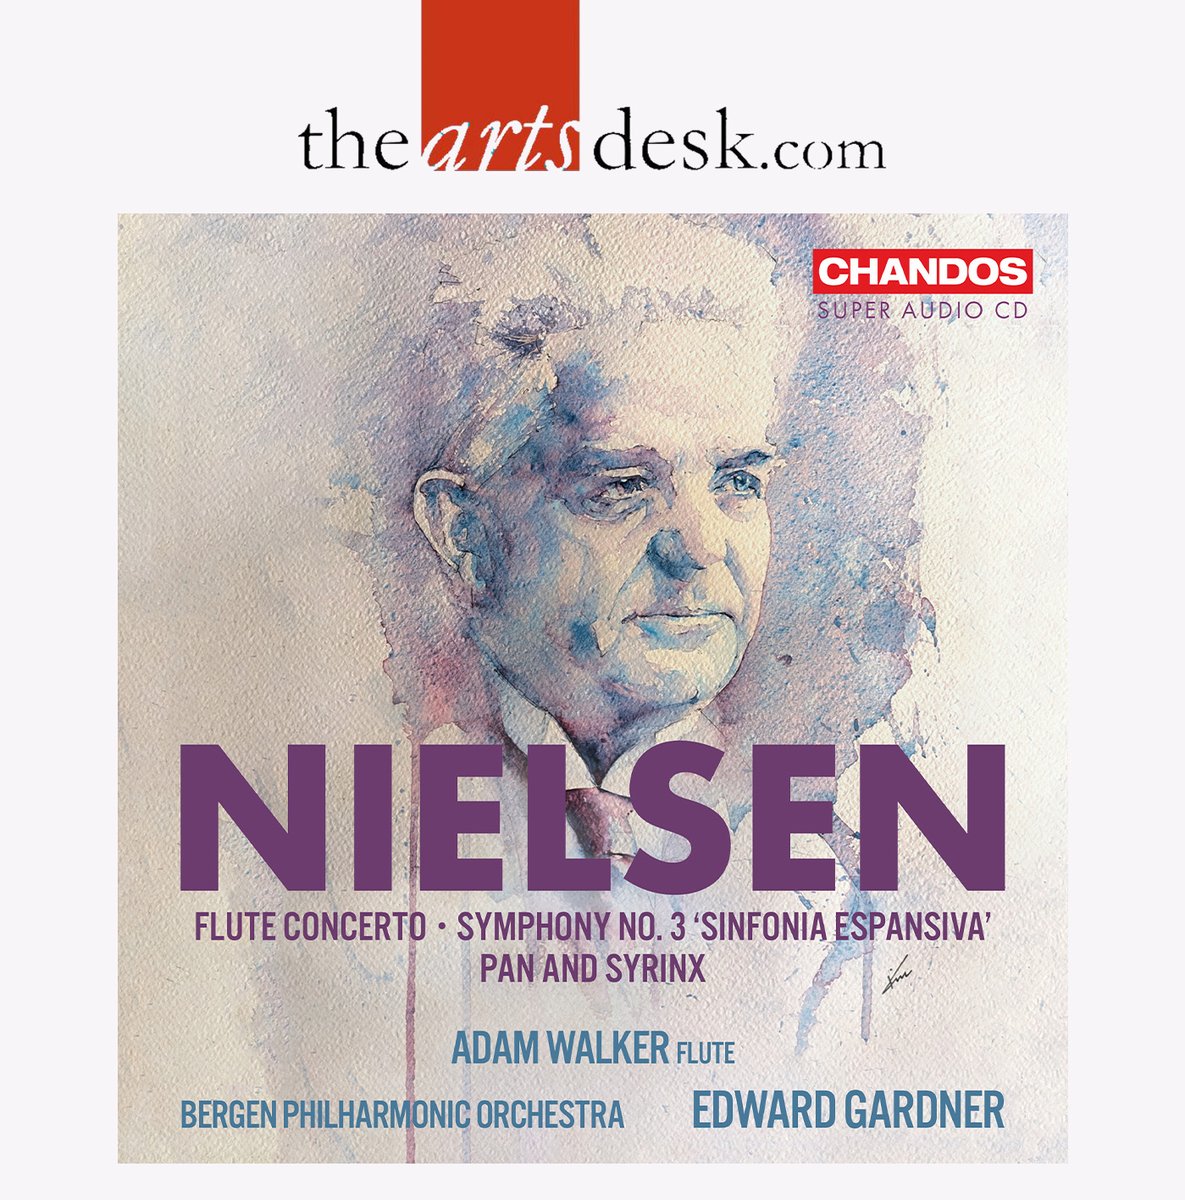 NEW REVIEW 🚨 Nielsen: Flute Concerto, Symphony No. 3, Pan and Syrinx ✨ '...Tremendous, in other words; if you've any friends or acquaintances who've not been bitten by the Nielsen bug, give them a copy of this disc. They'll thank you.' Listen now!👉lnk.to/CHSA5312FA